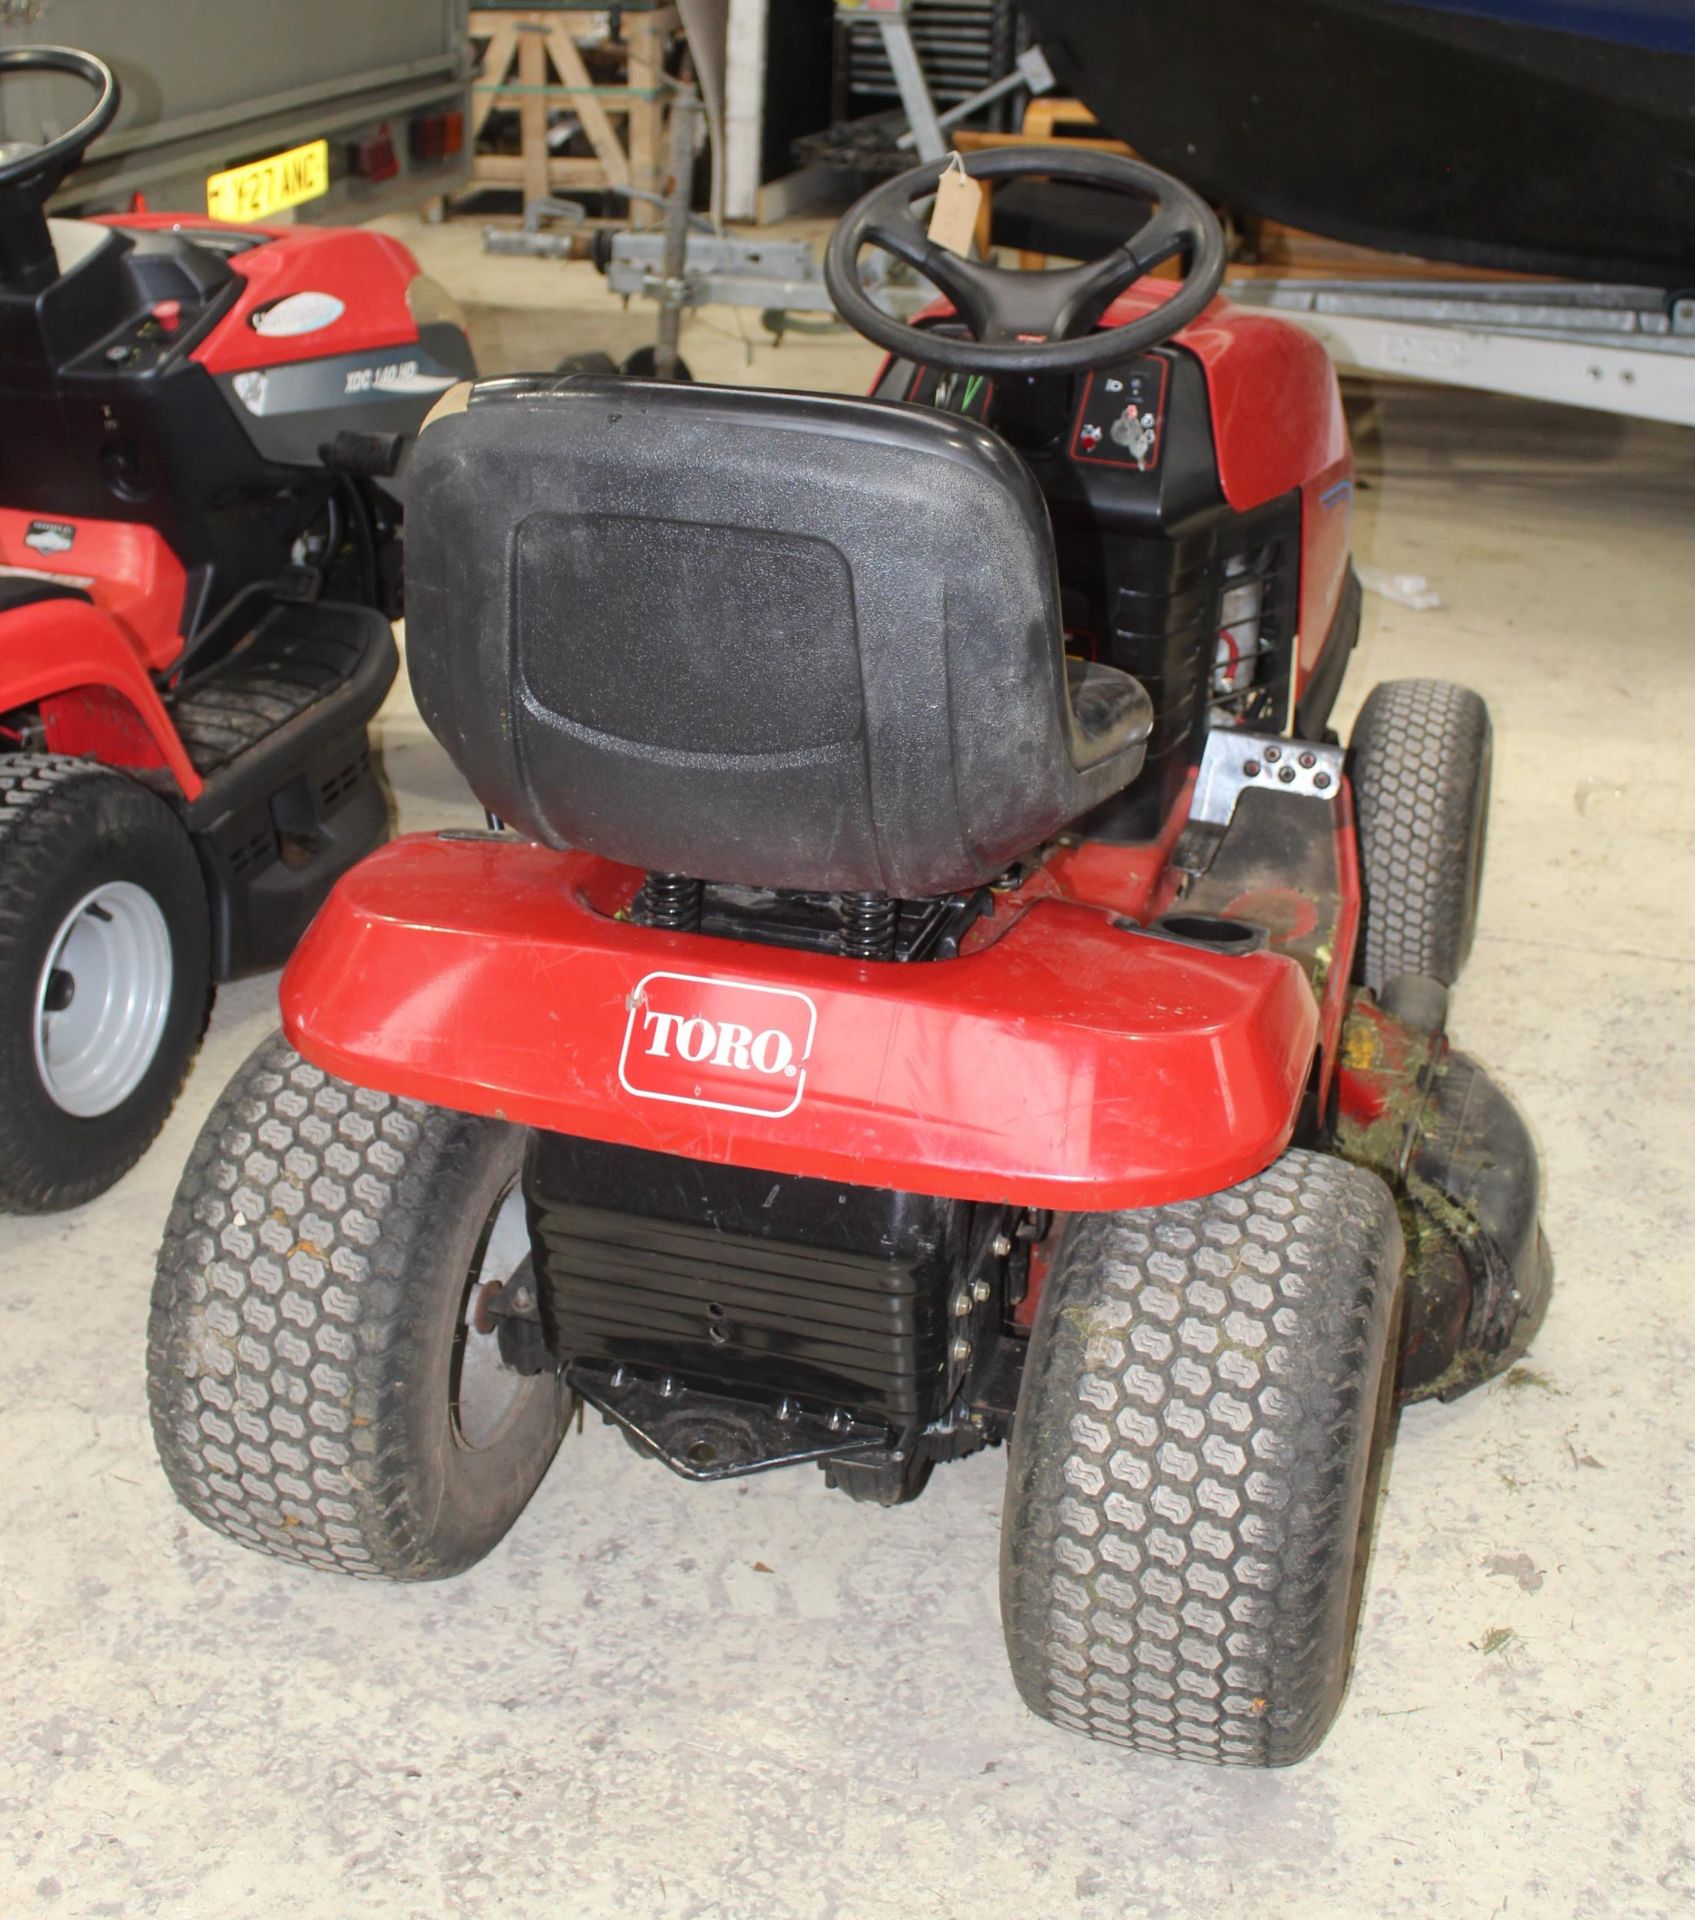 MTD CUB CADET RIDE ON MOWER WITH BRIGGS & STRATTON VANGUARD V-TWIN 20HP ENGINE + VAT KEY IN OFFICE - Image 5 of 6